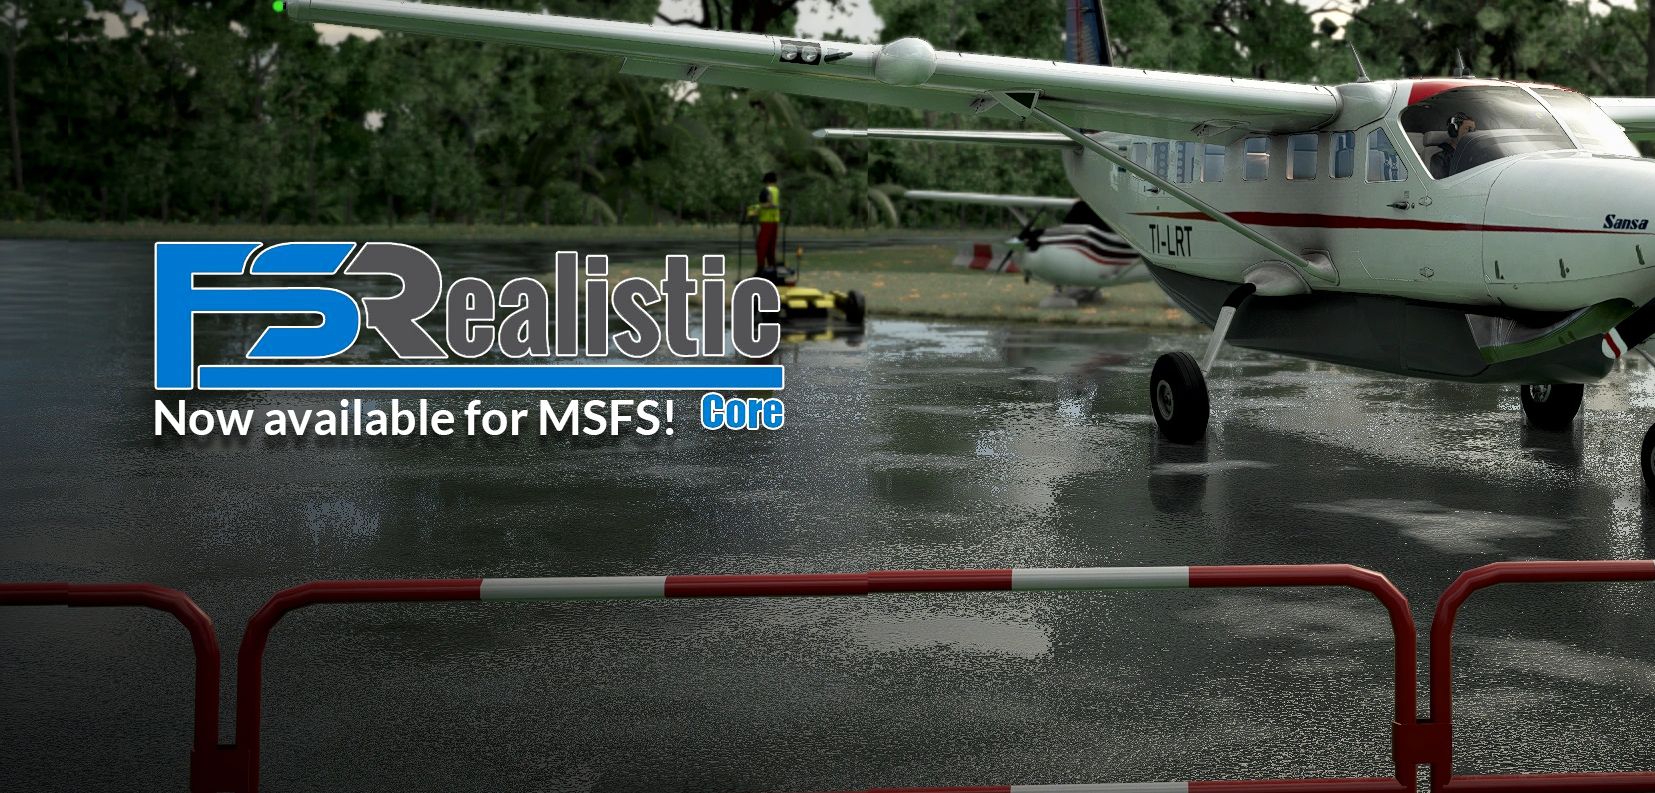 FSRealistic Core now available - enhance your in-sim immersion